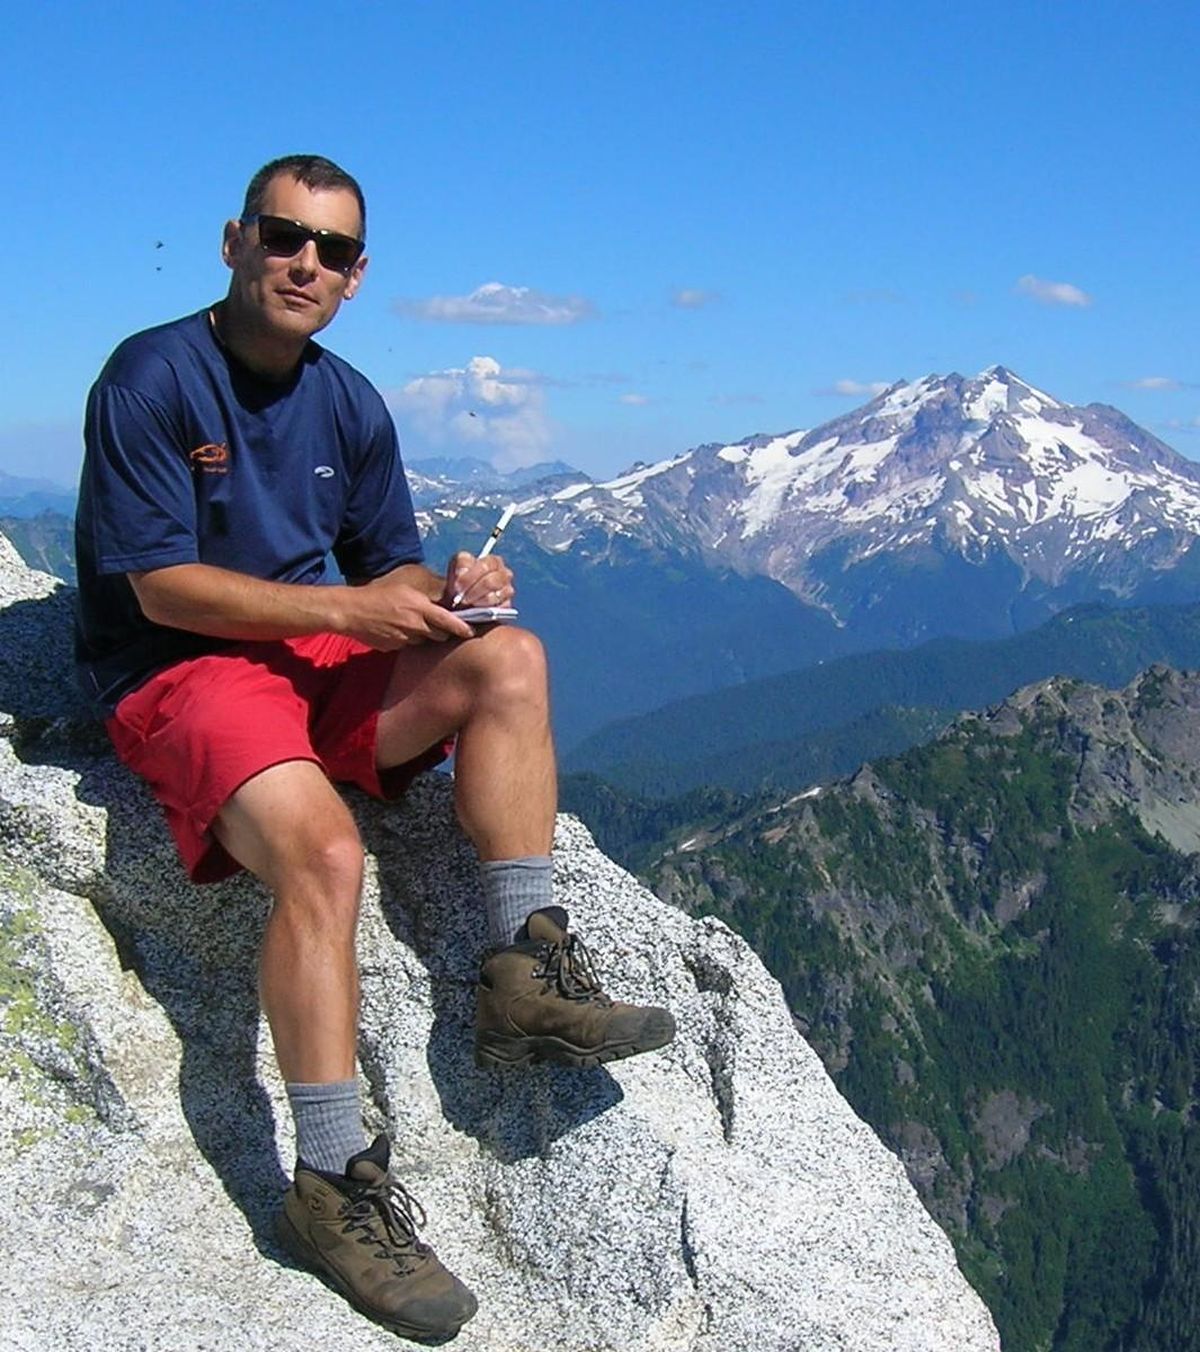 Craig Romano of Mount Vernon put in the work to update “100 Classic Hikes in Washington” guidebook. (Courtesy)